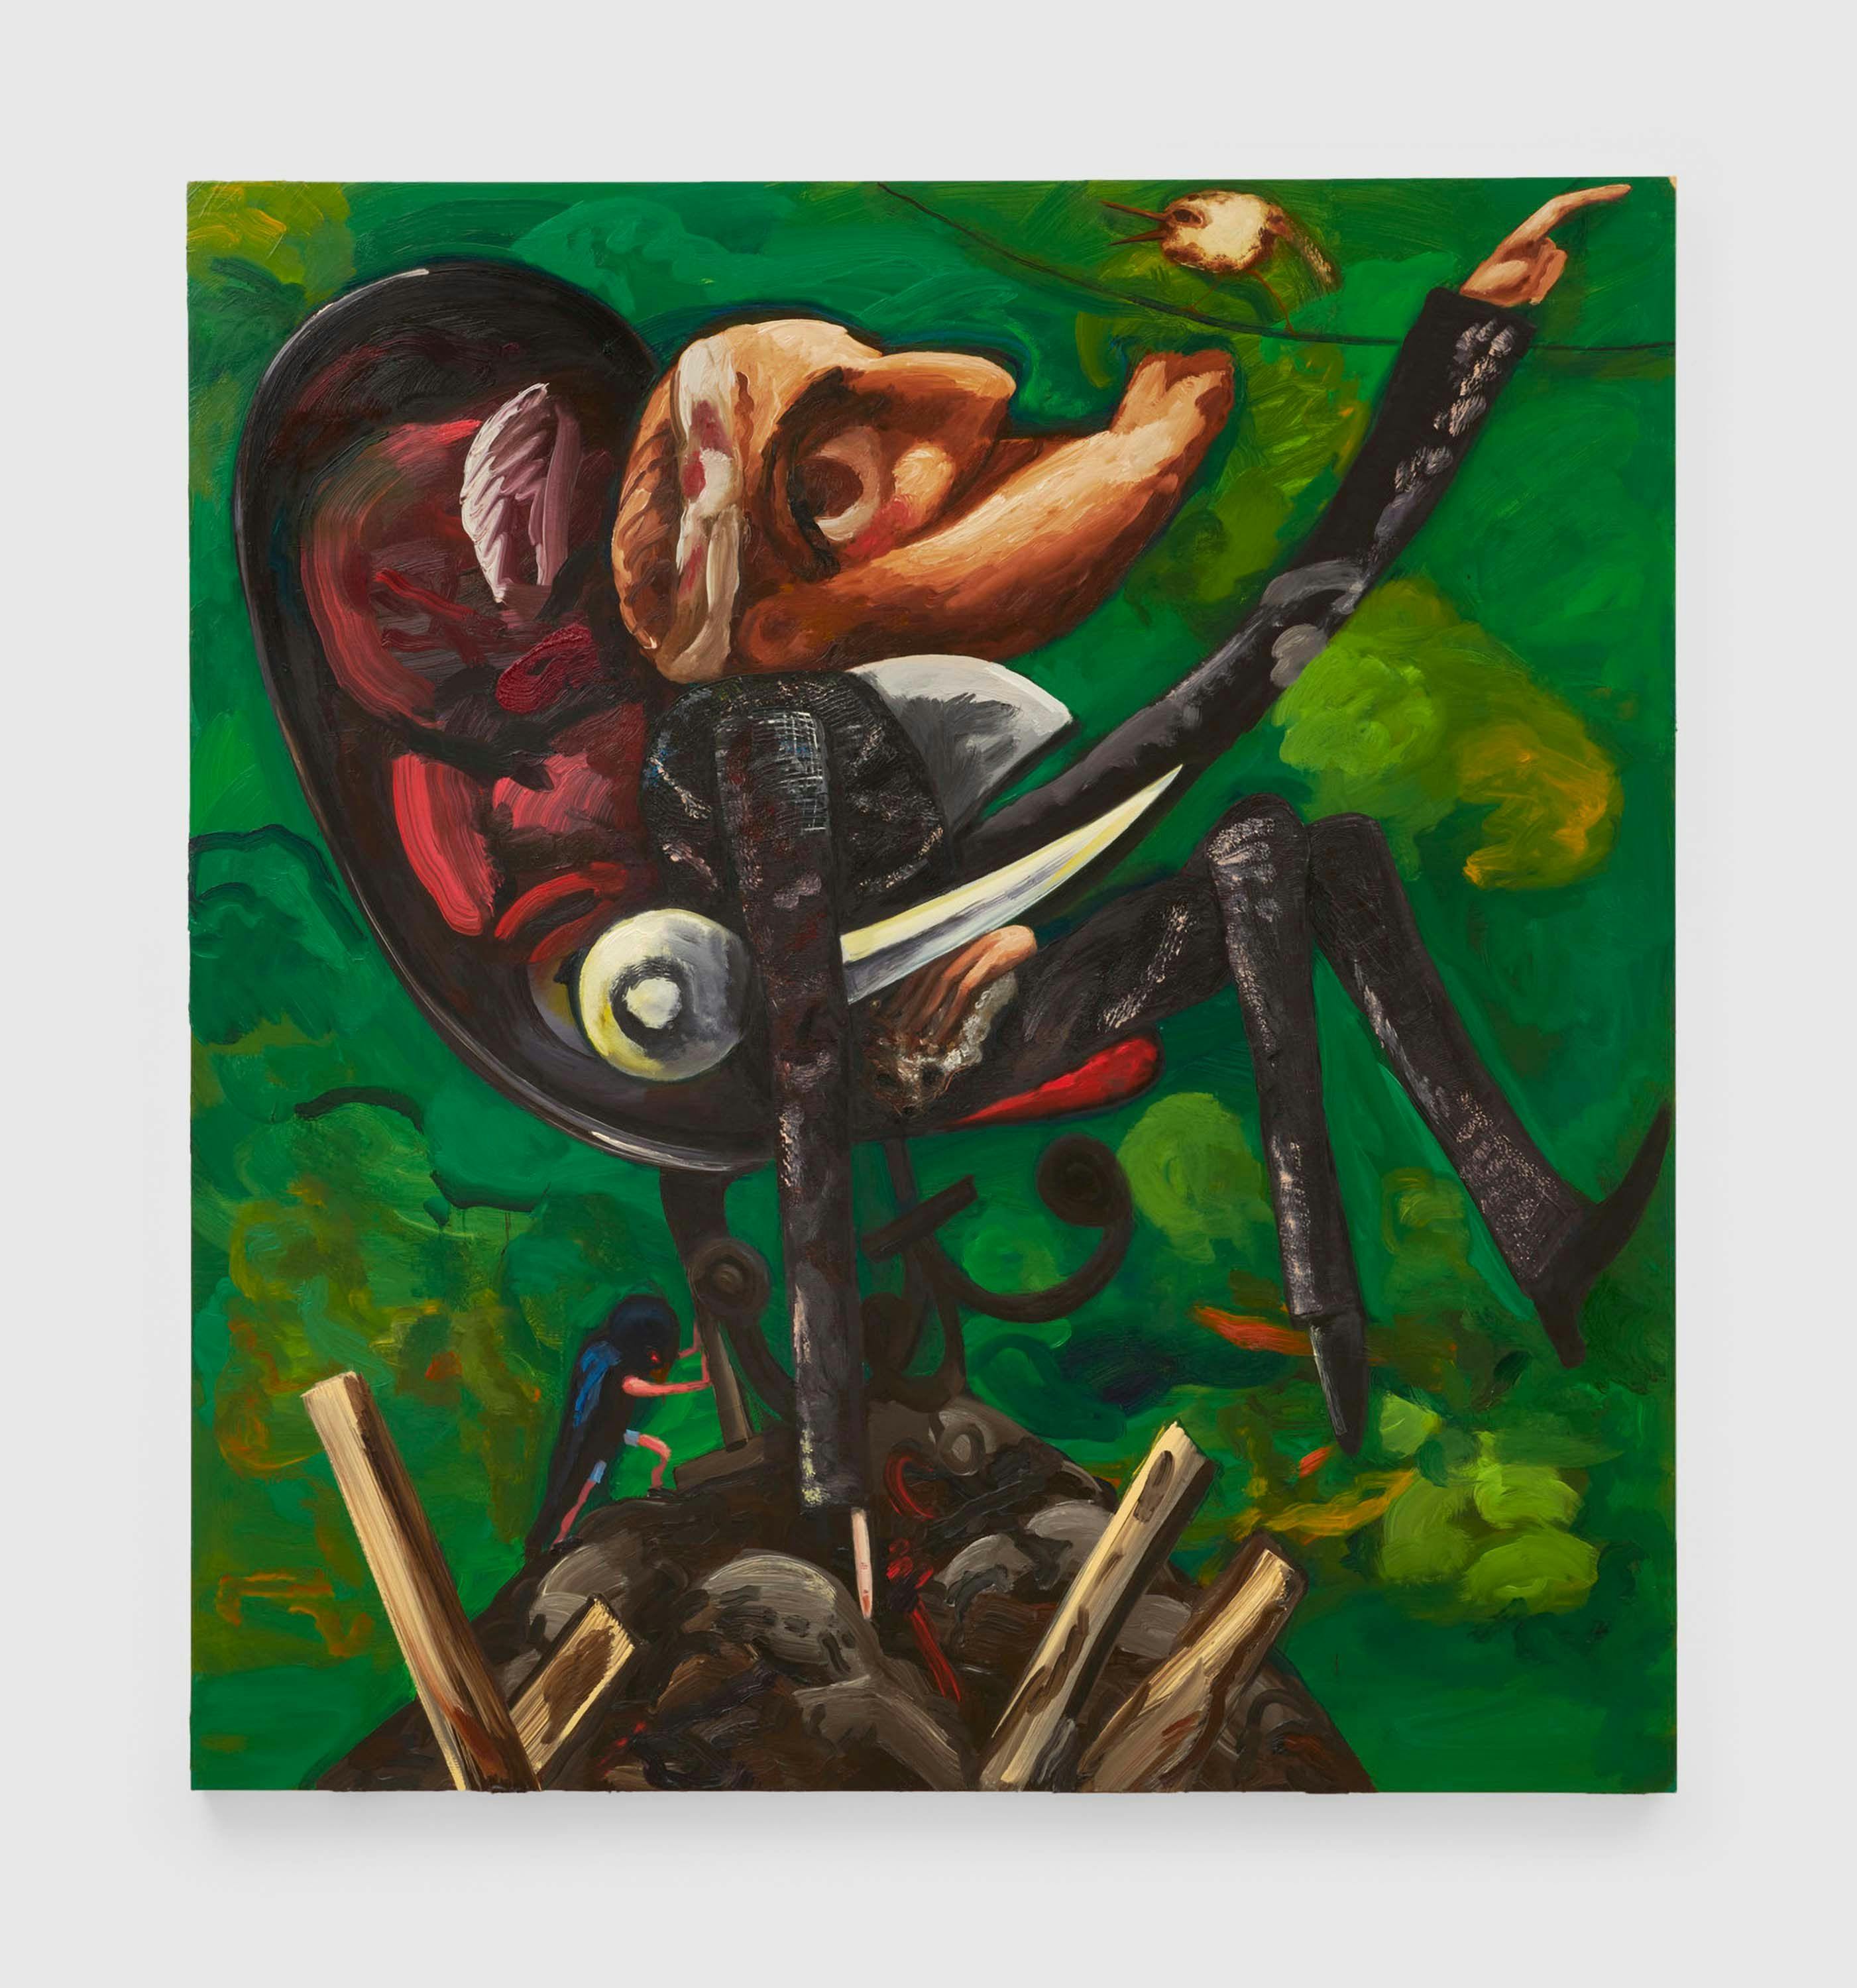 A painting by Dana Schutz, titled The Victor, dated 2020.